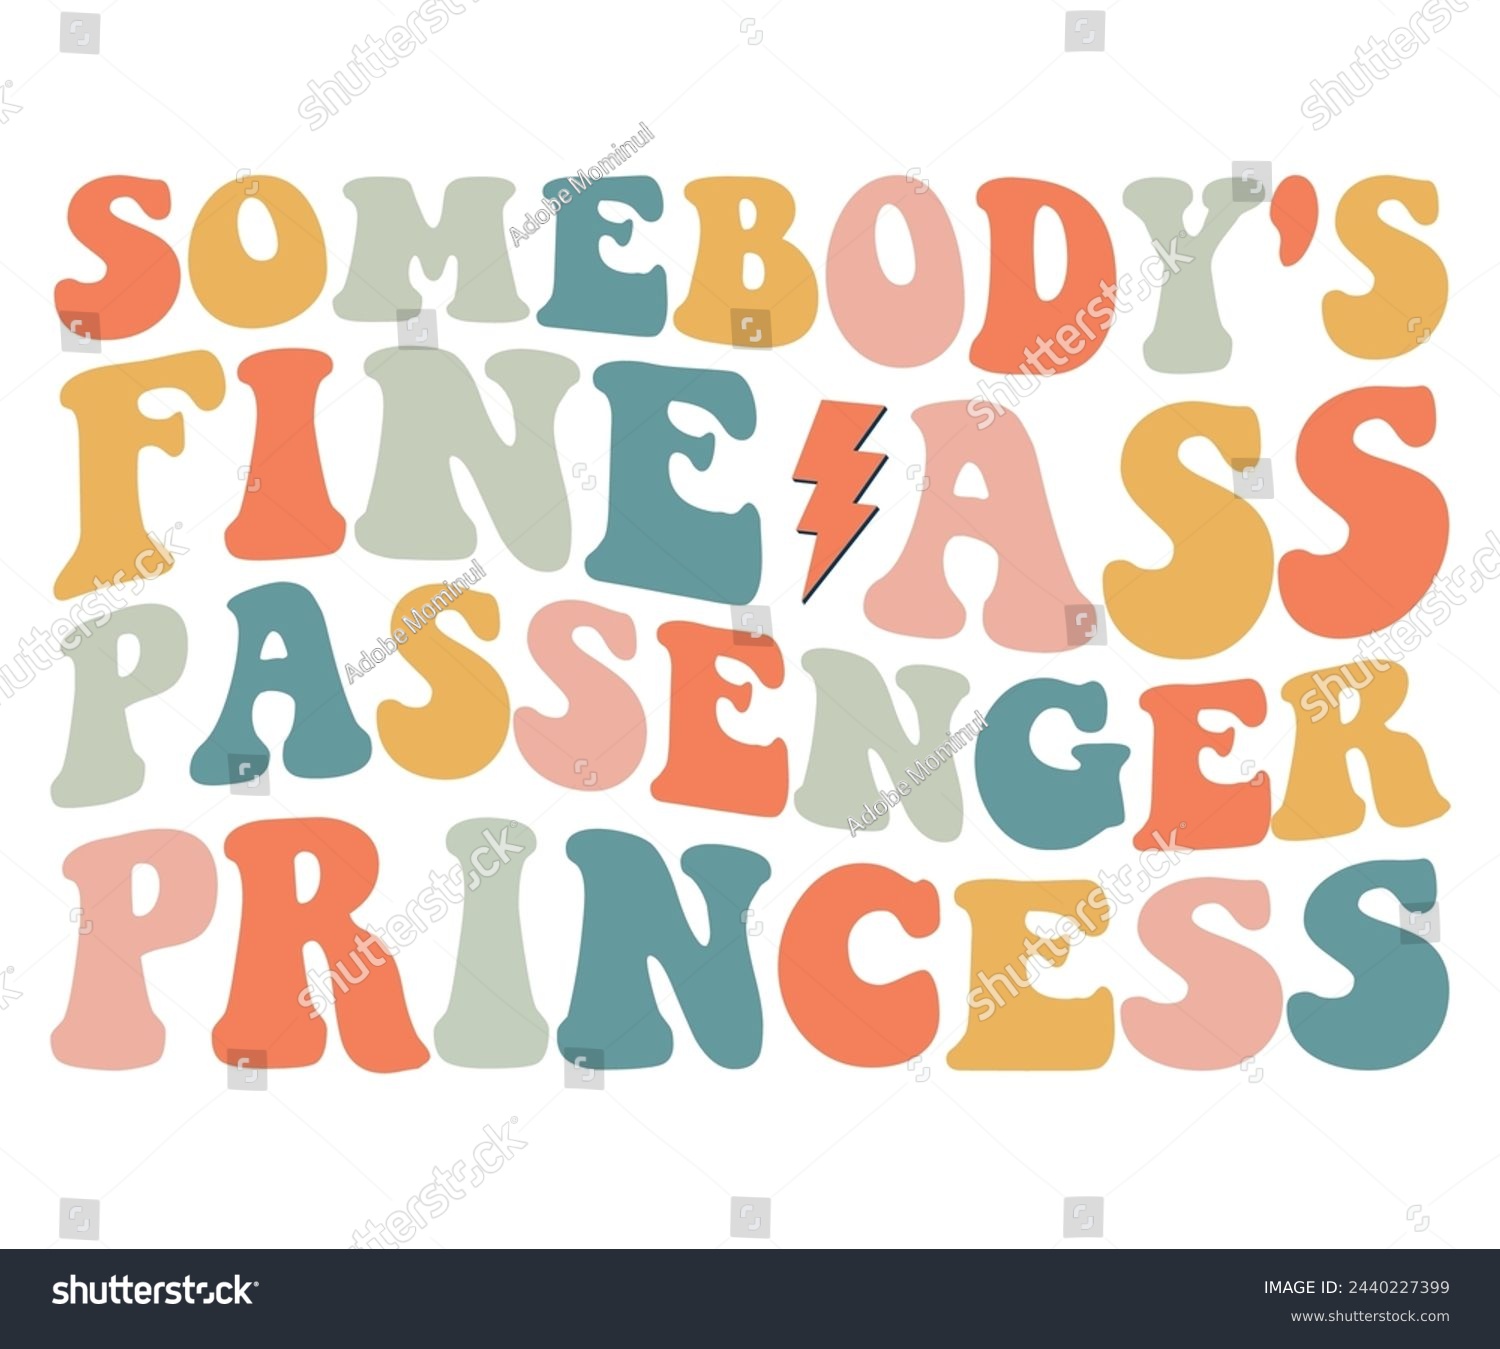 SVG of Somebody's Fine Ass Passenger Princess,Retro Groovy,Svg,T-shirt,Typography,Svg Cut File,Commercial Use,Instant Download  svg